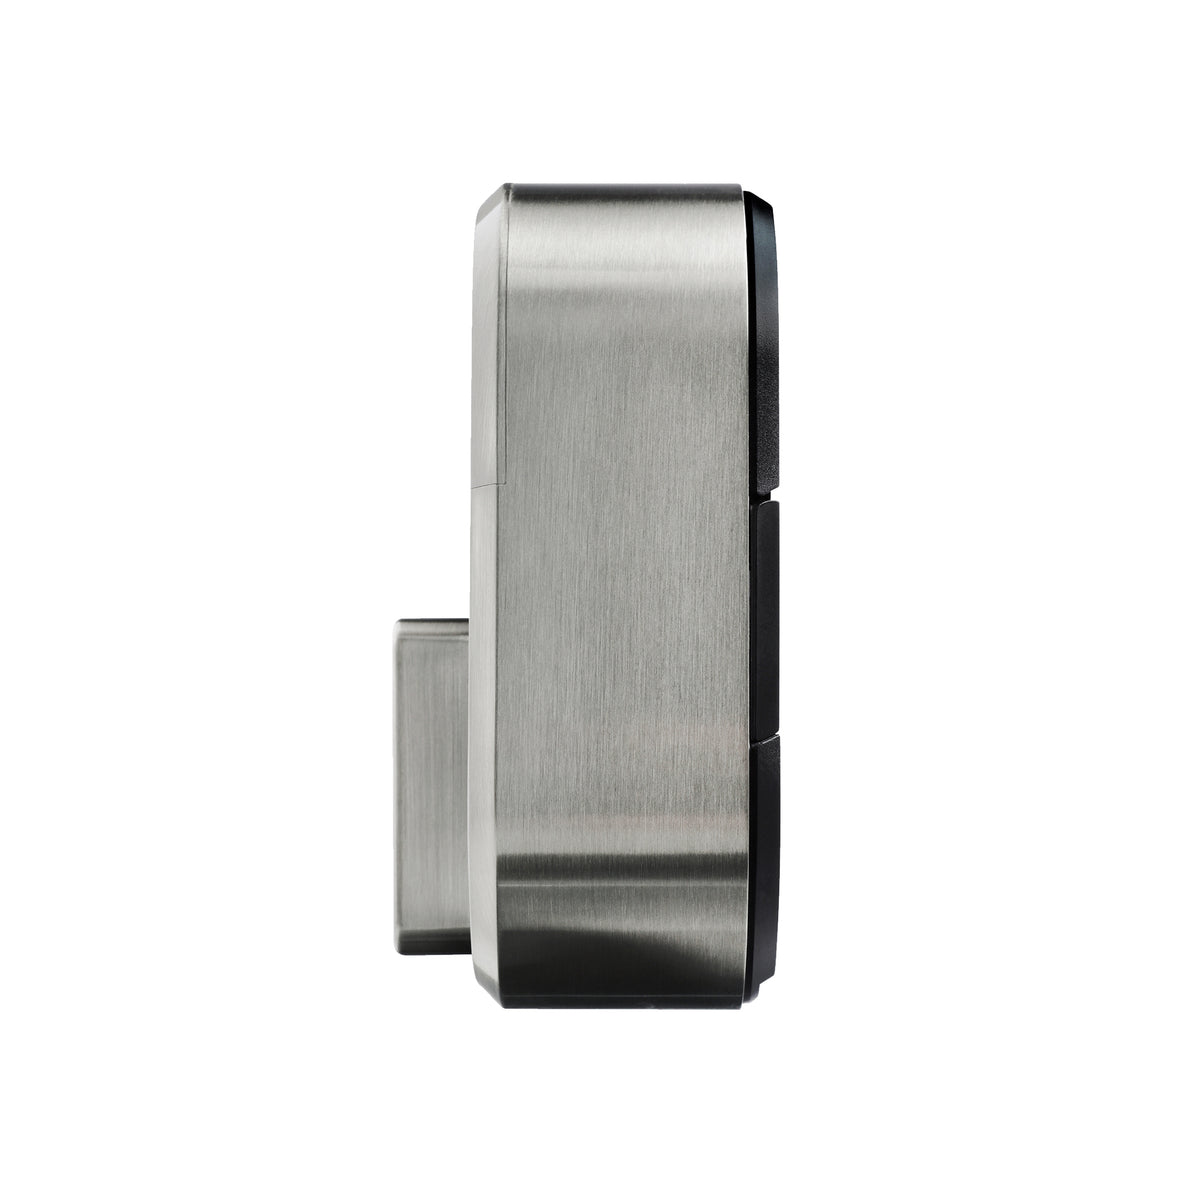 August Smart Lock + Connect - Satin Nickel - side profile